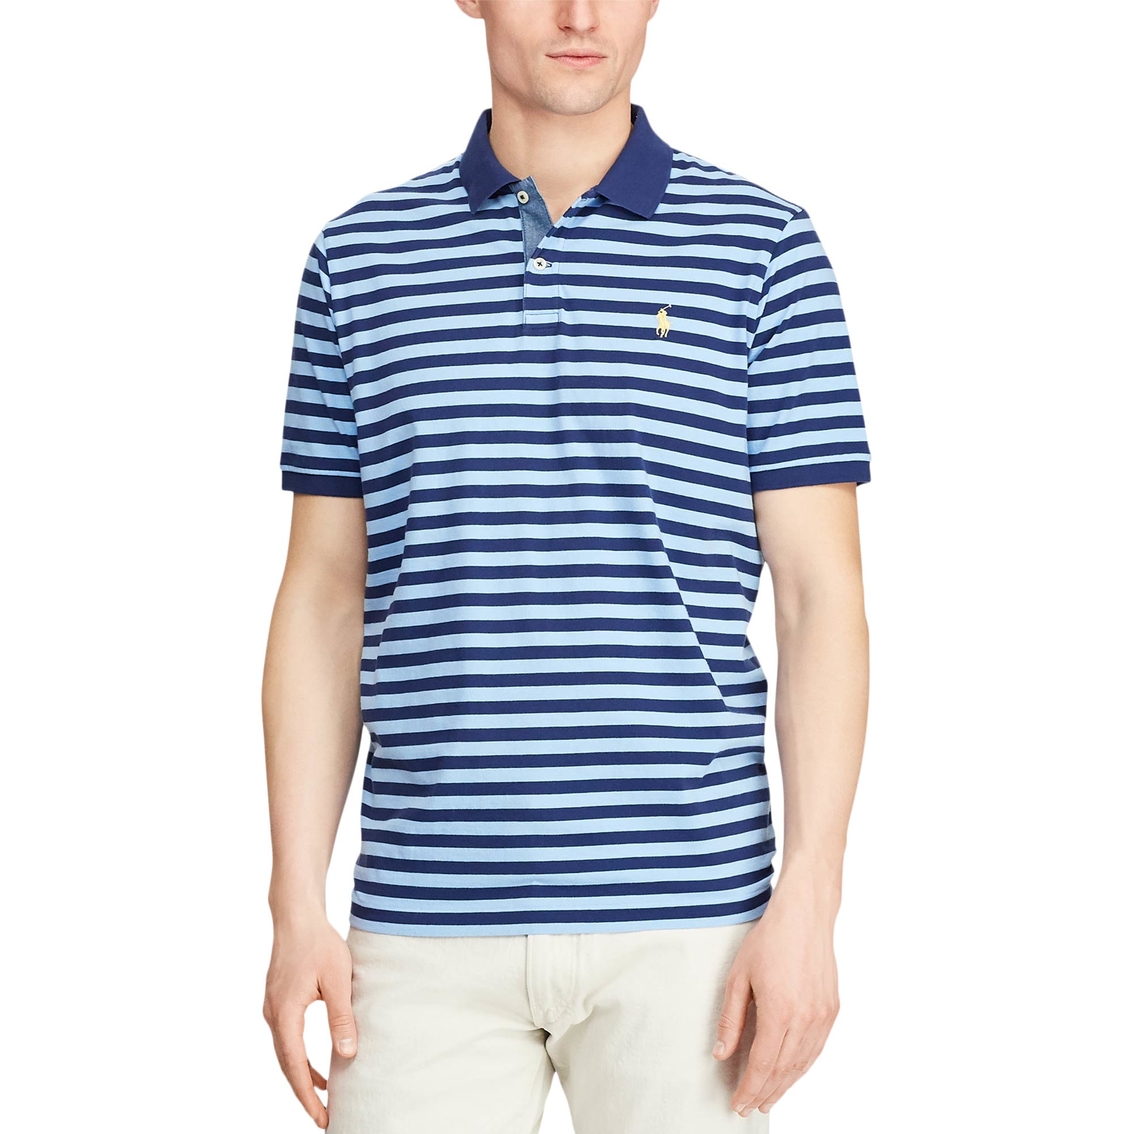 Polo Ralph Lauren Classic Fit Jersey Polo Shirt | Shirts | Clothing ...